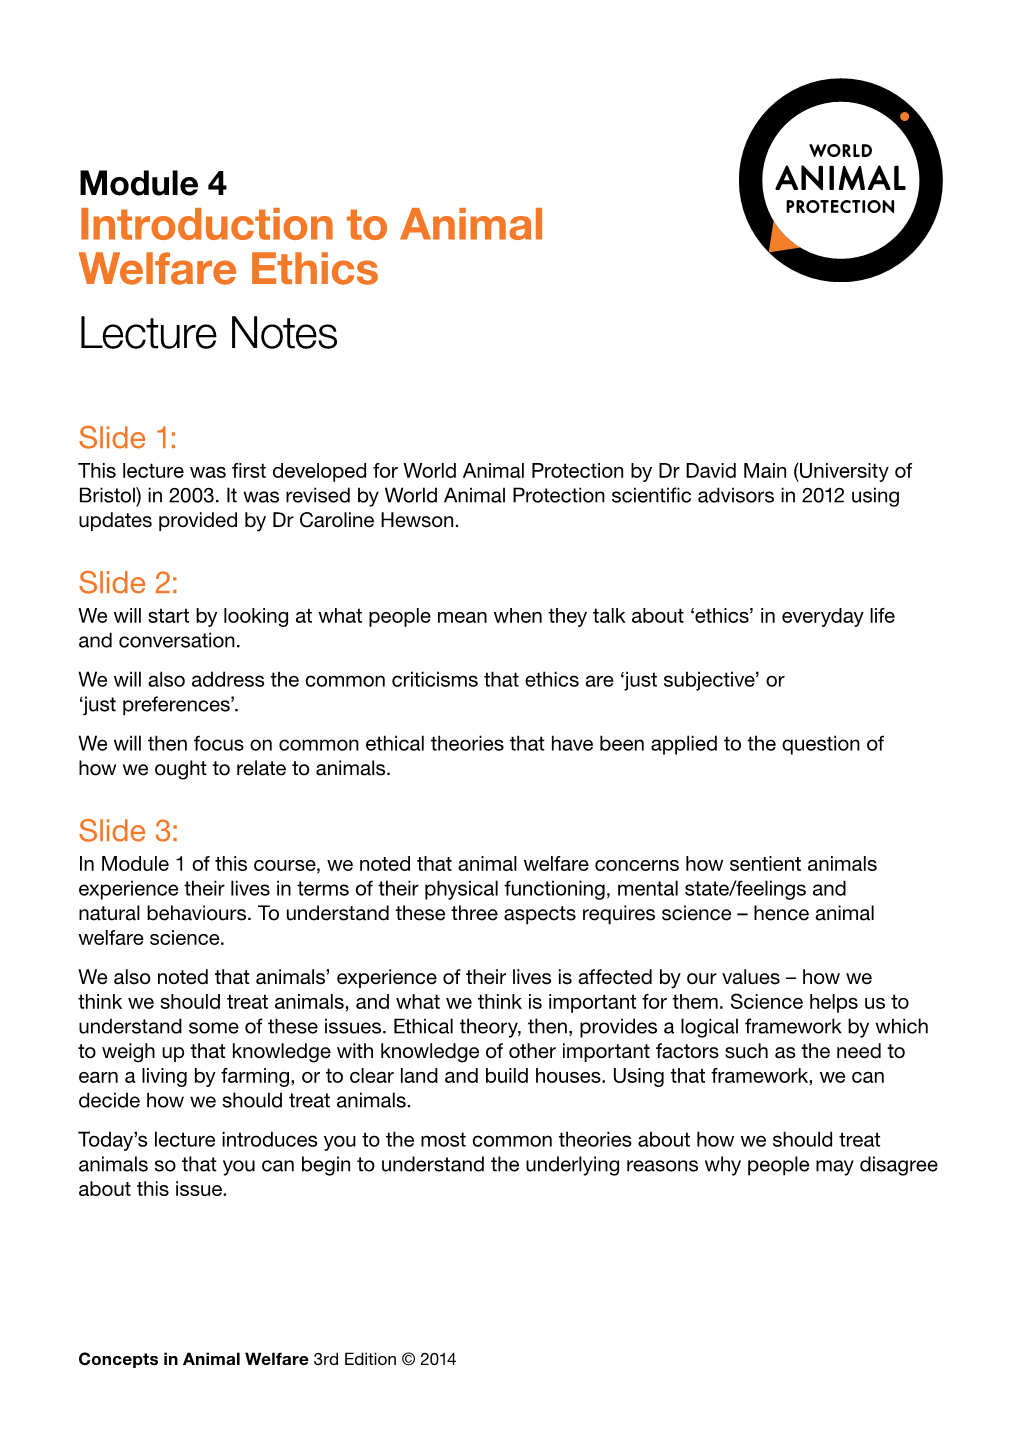 Introduction to Animal Welfare Ethics Lecture Notes